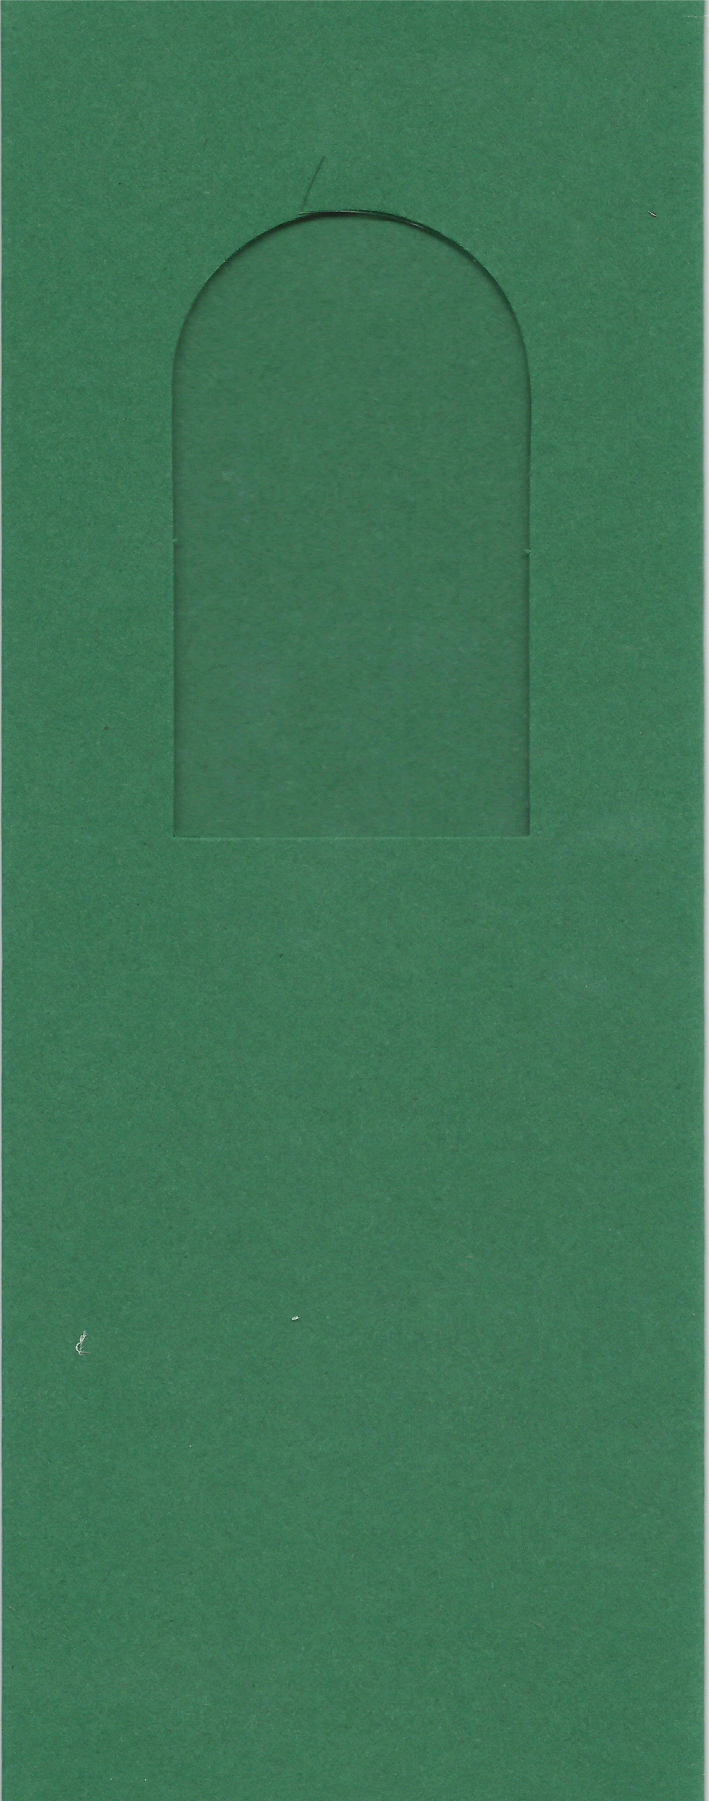 PK282-23 Green Double Fold with Small Arched Aperture.  Pack of 5 Cards       